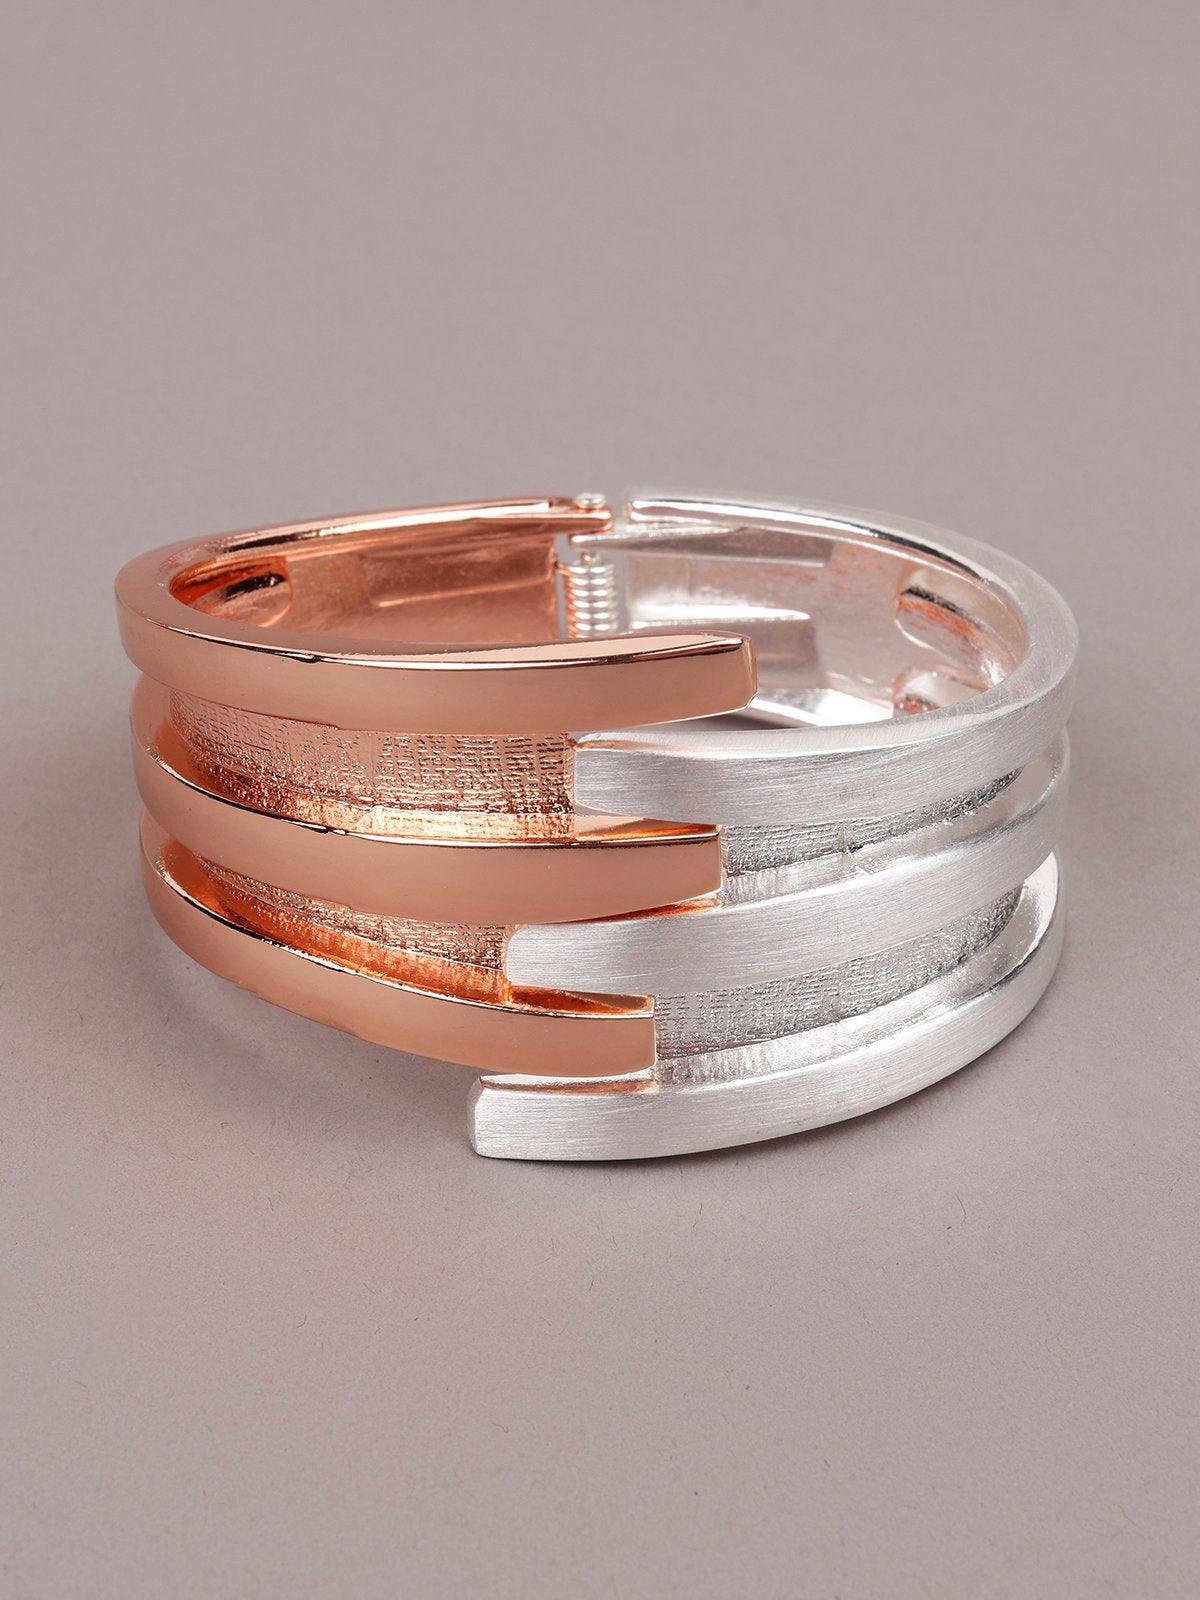 Women's Dual Coloured Rose Gold And Stunning Silver Bracelet - Odette